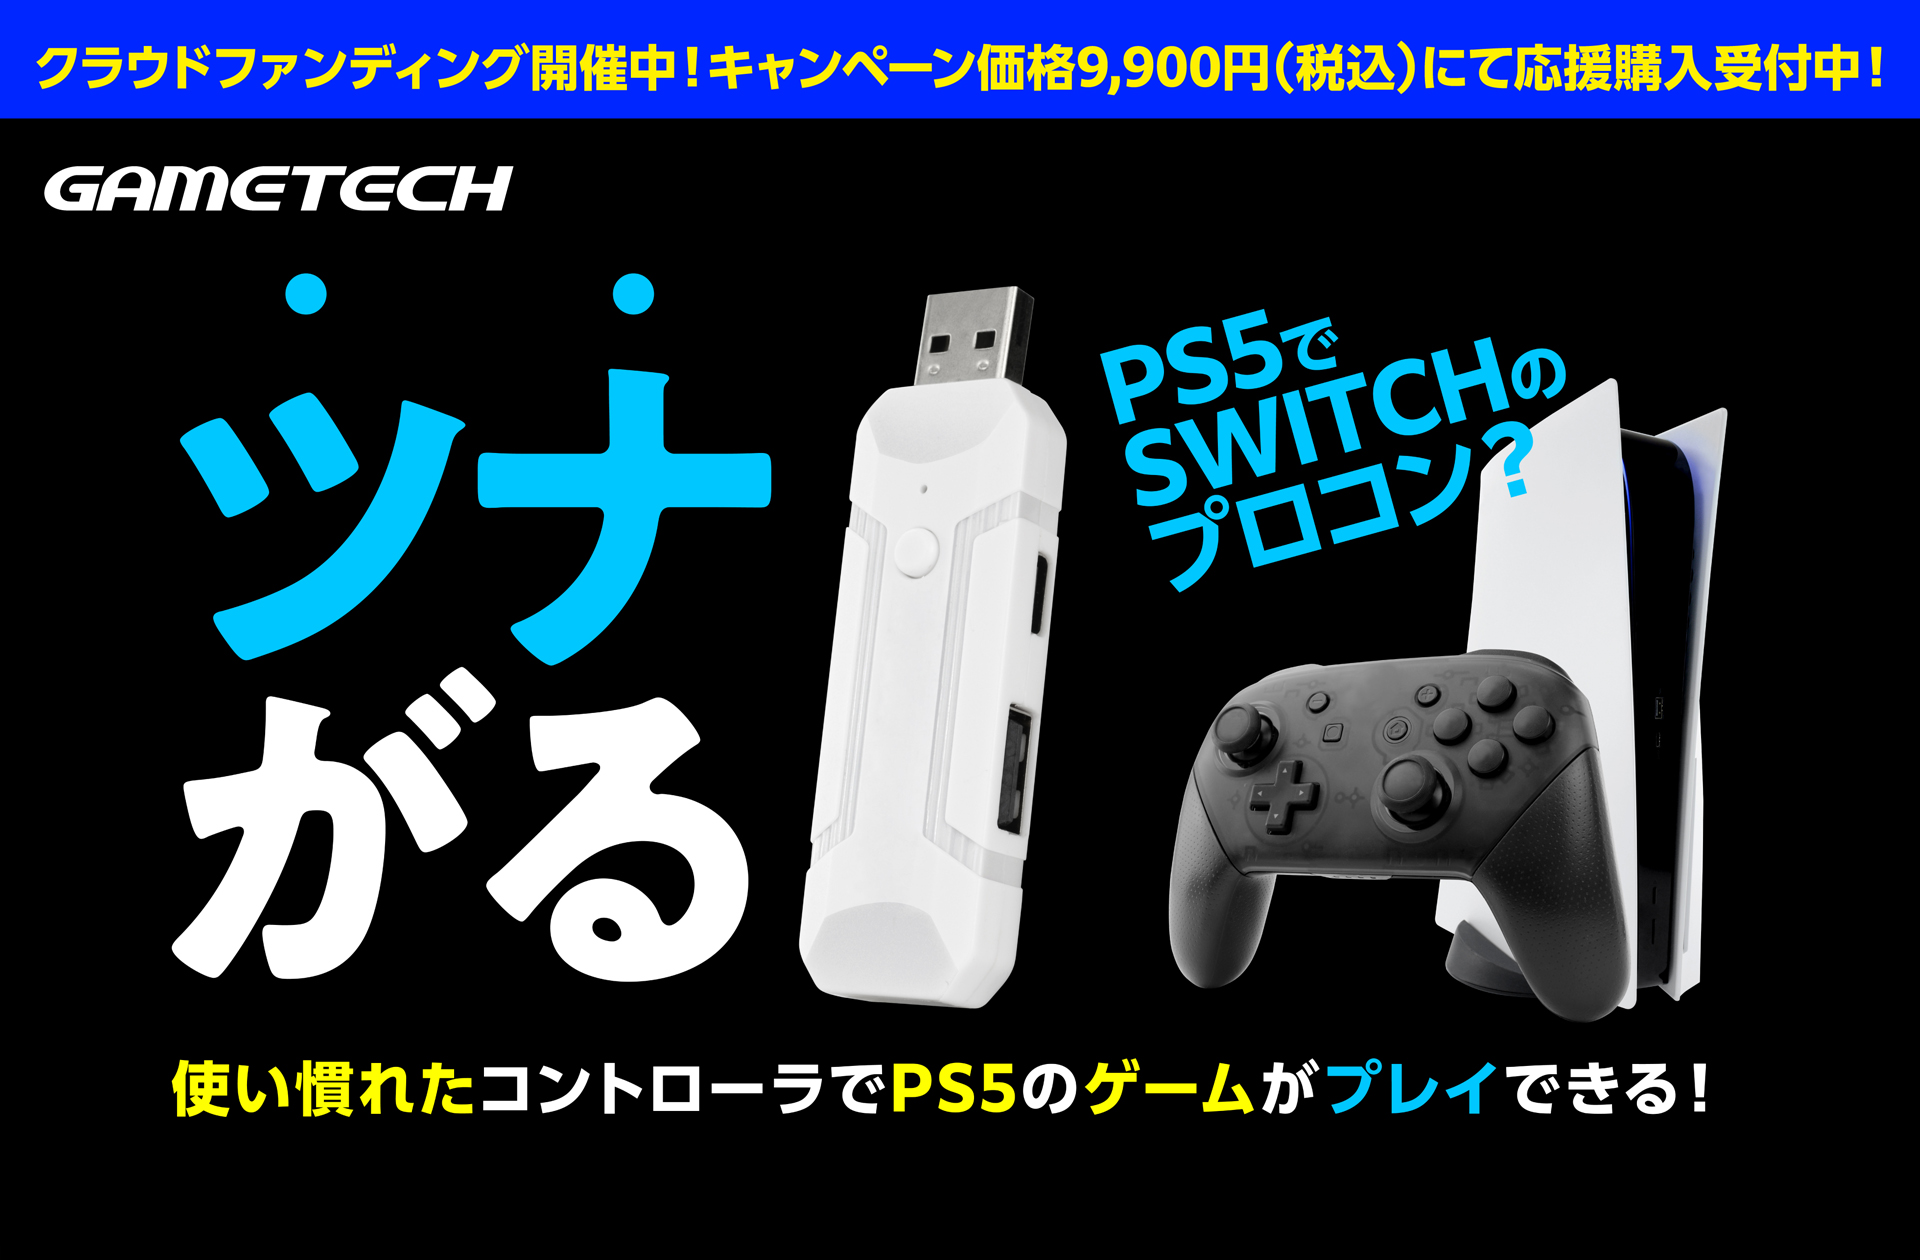 Switch ProコンやPS4用コントローラが使える。「ツナイデント5 